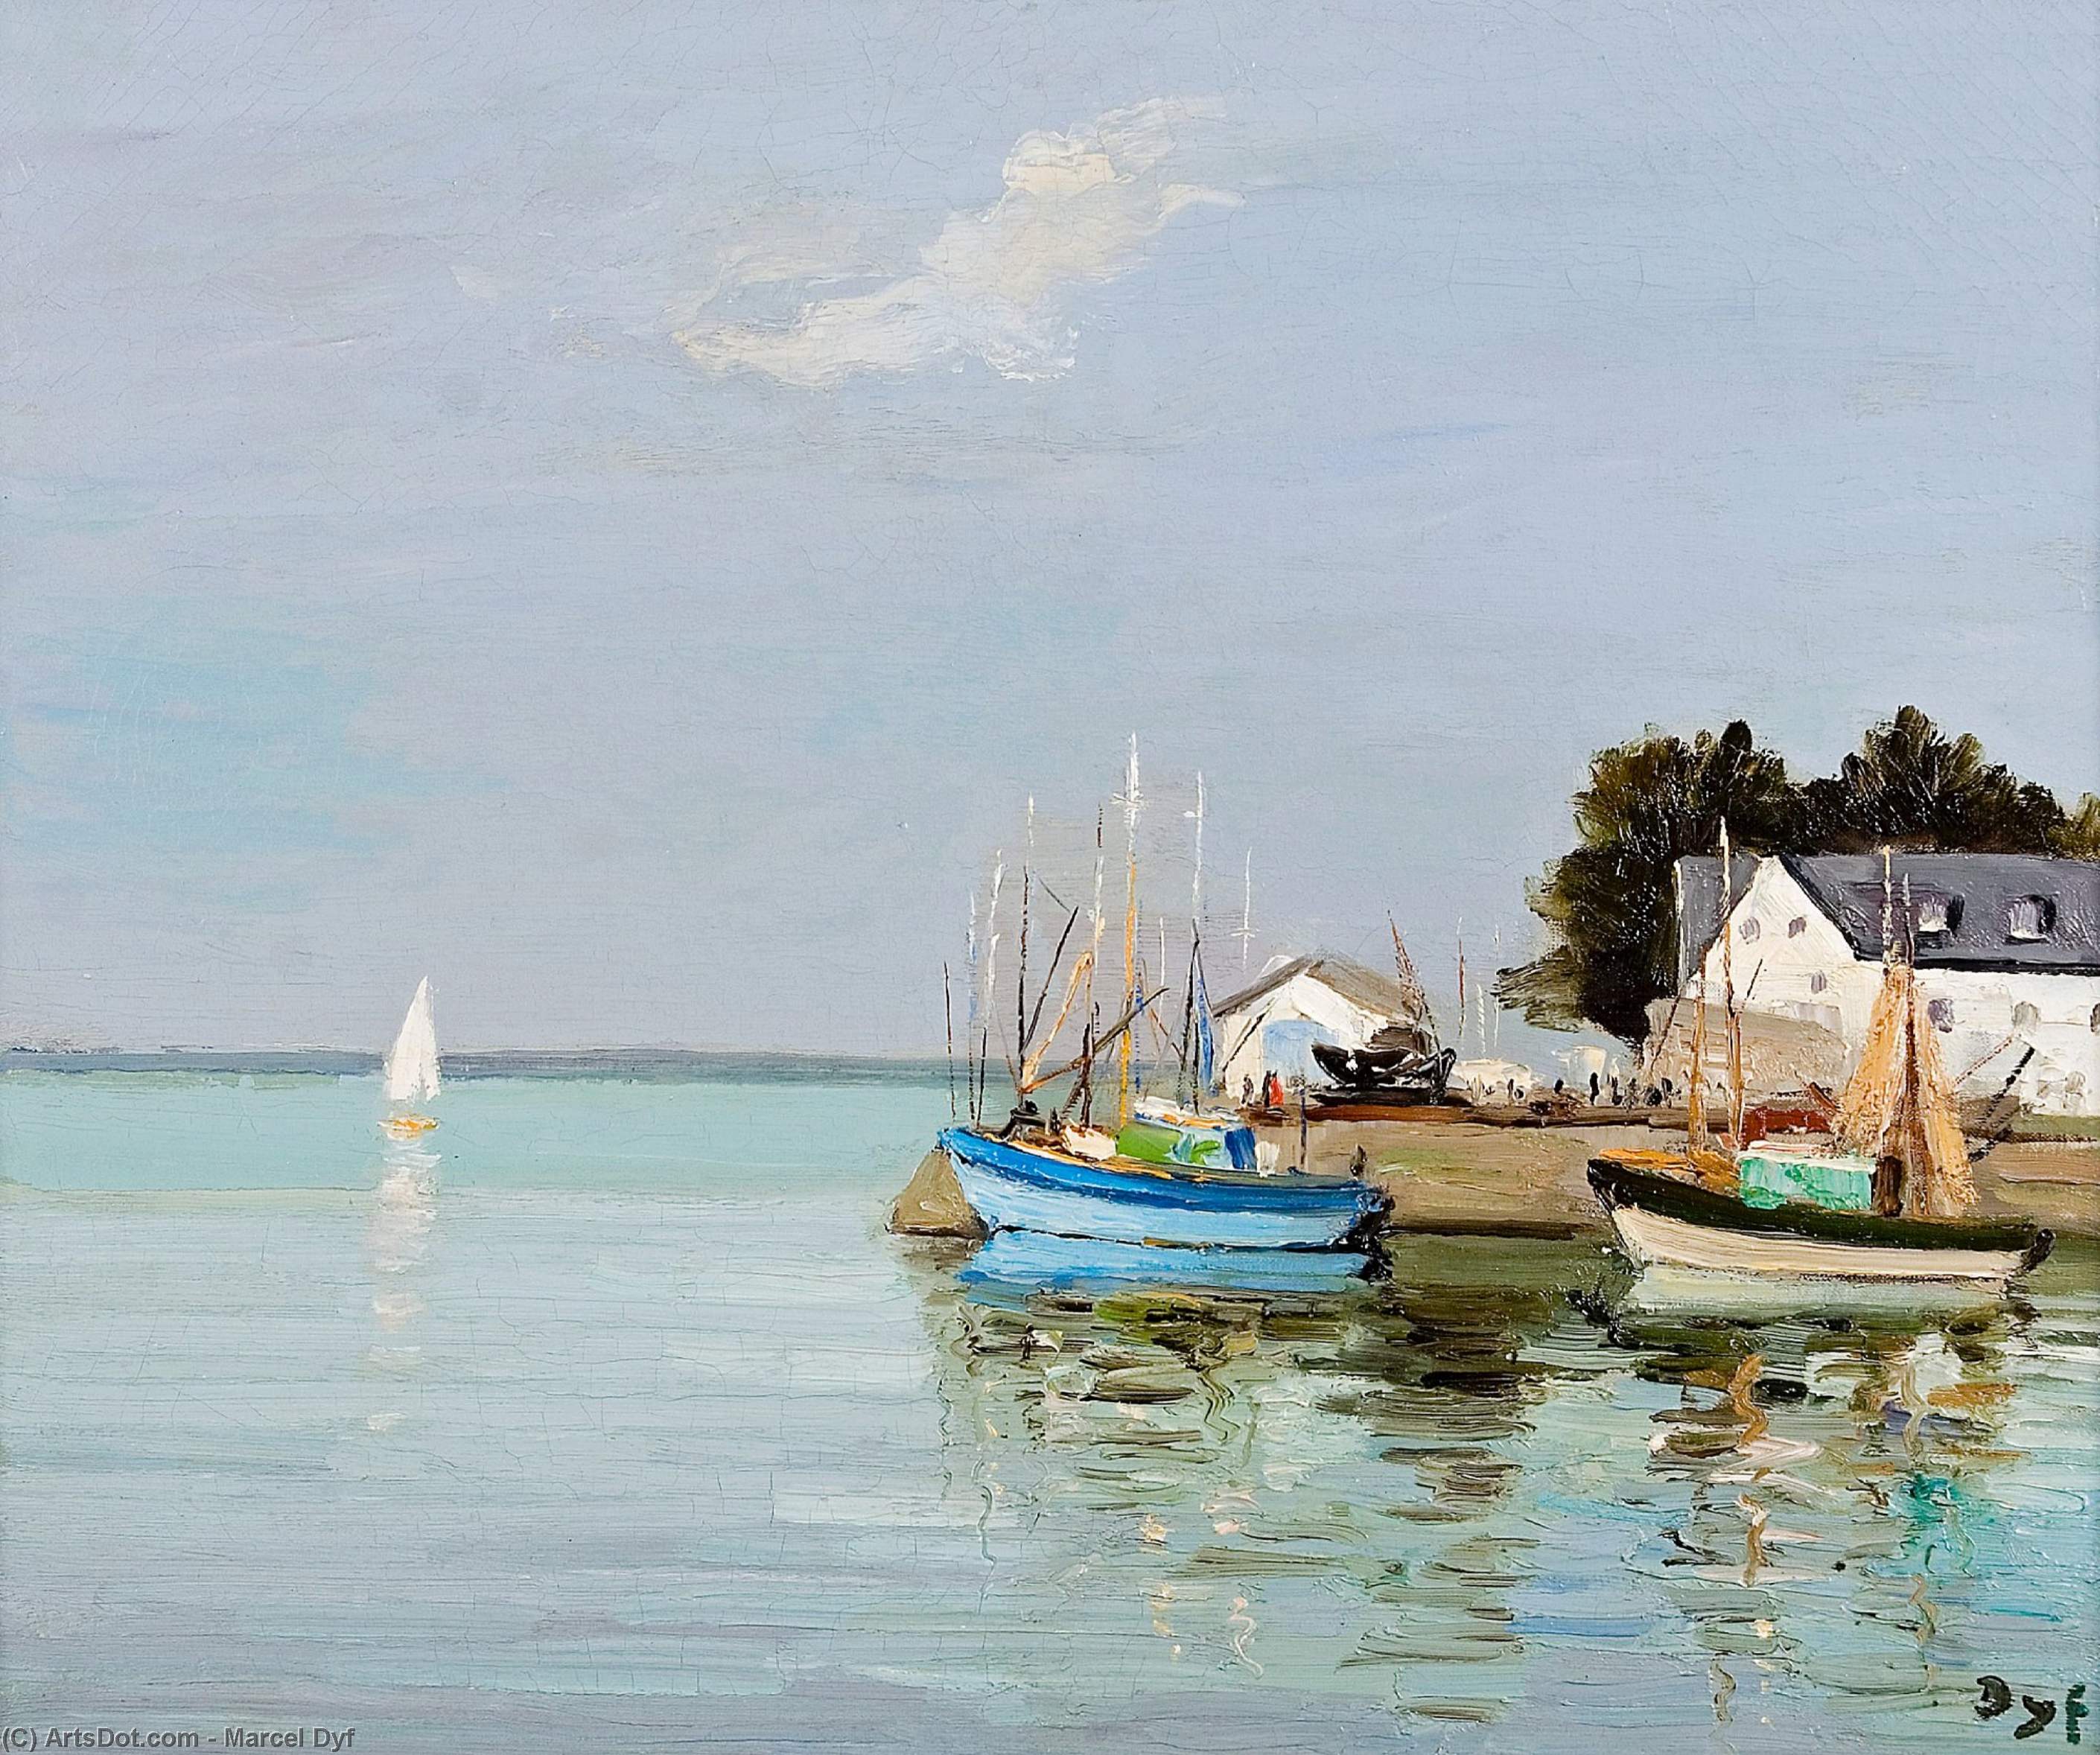 WikiOO.org - 백과 사전 - 회화, 삽화 Marcel Dyf - Loctudy, finistere, brittany, (1970)